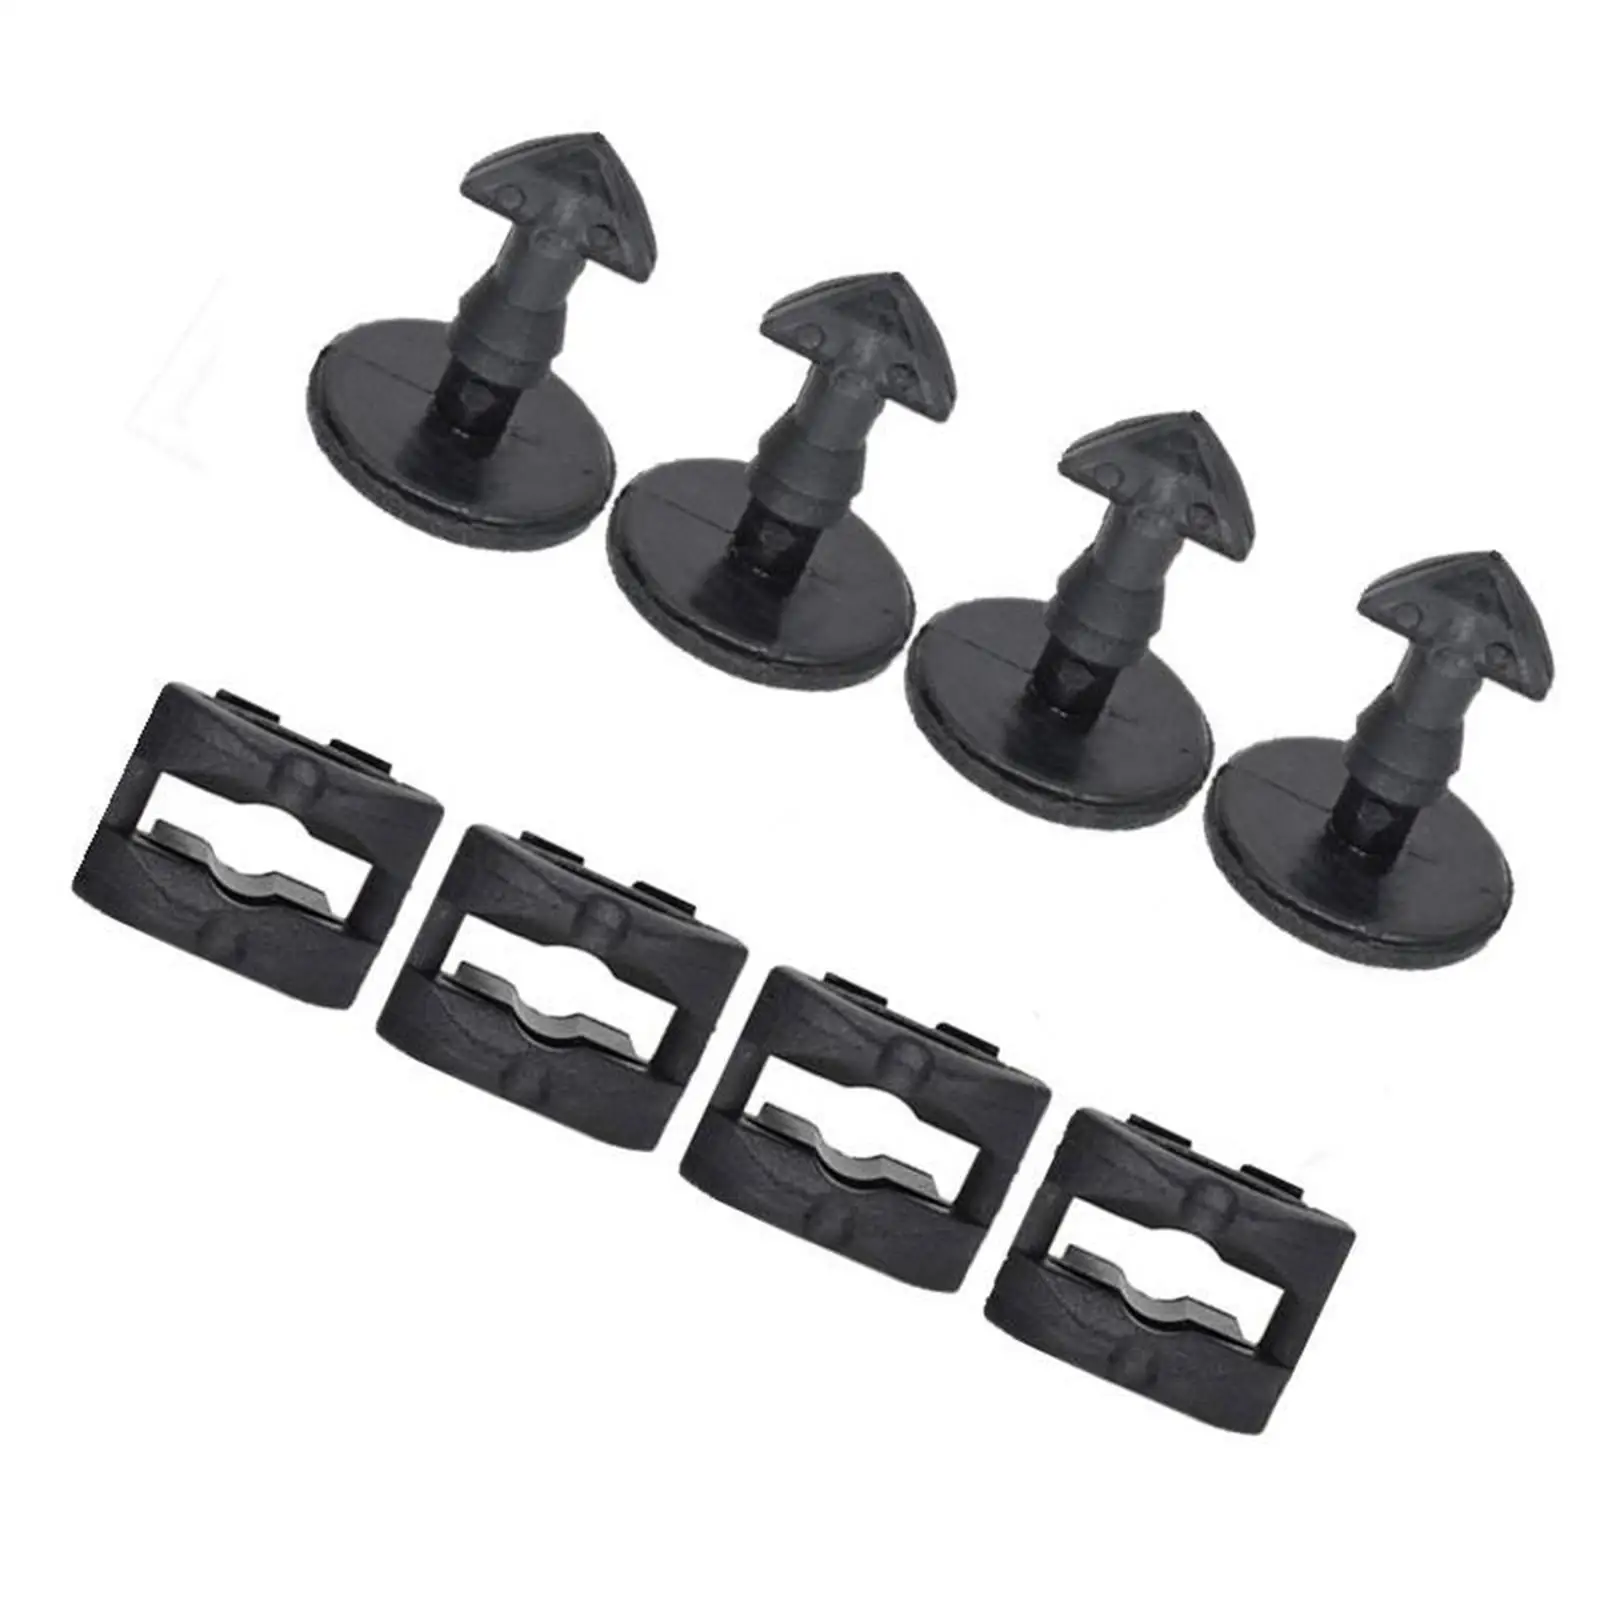 4Pcs Bumper Tow Eye Cover Clips Fastener Fender Retainer for Land Rover Discovery 3 4 Range Rover Sport Easy Installation